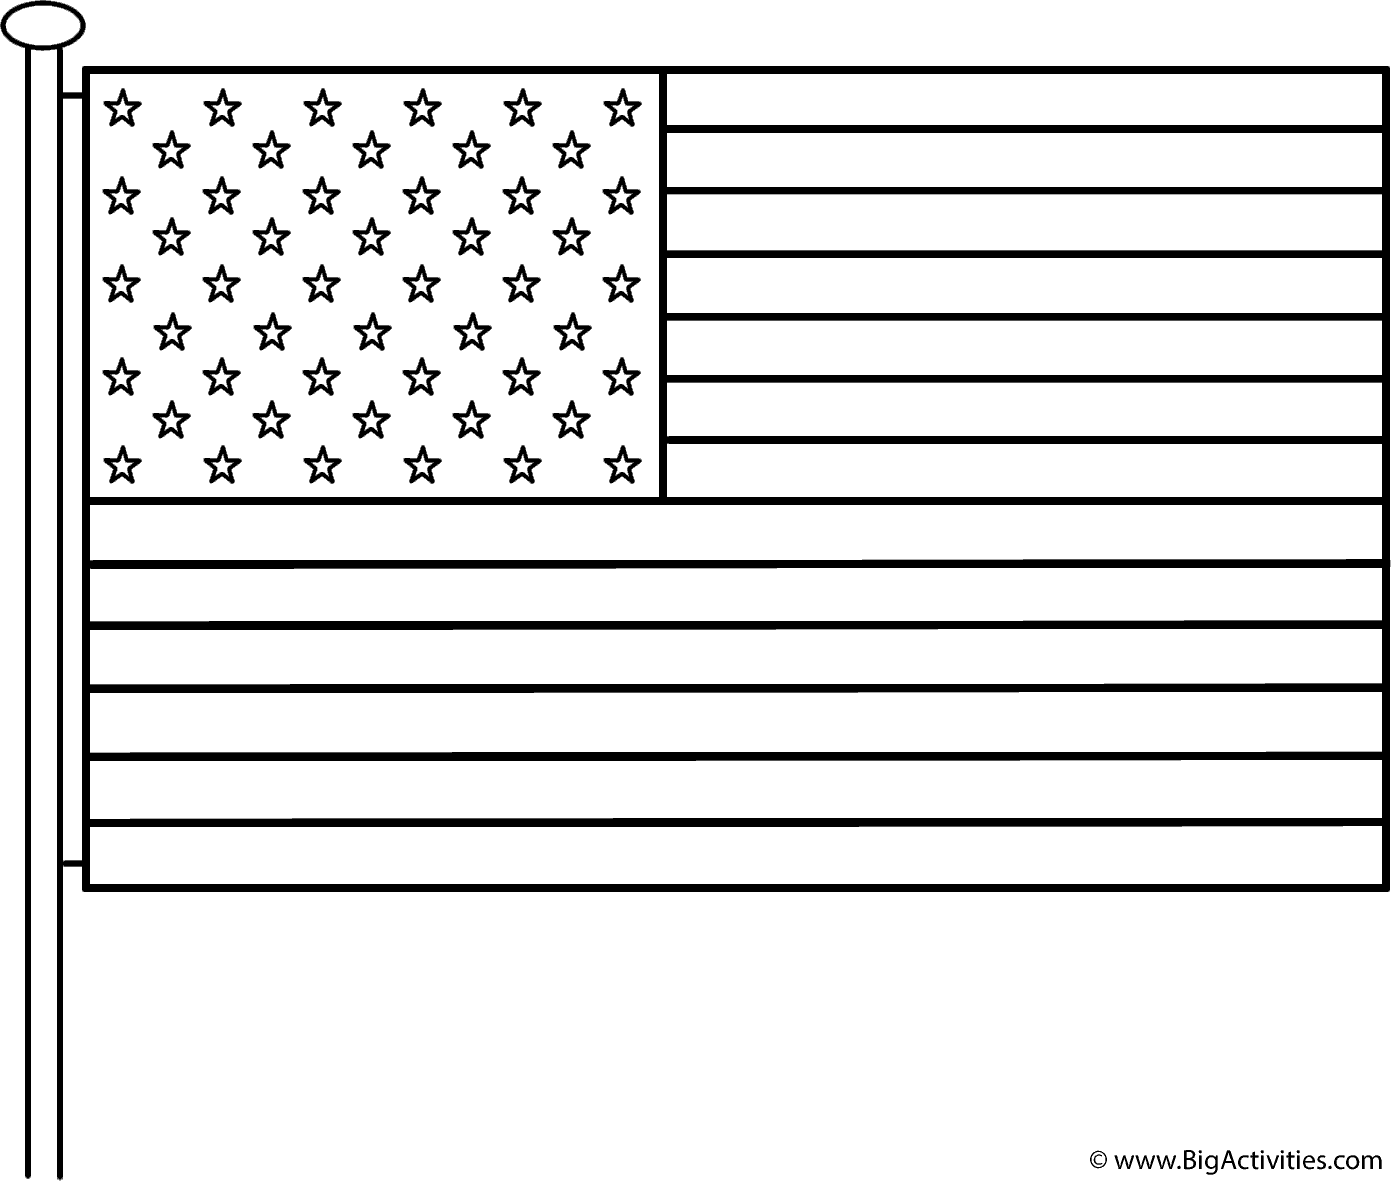 American Flag with a Pole - Coloring Page (Independence Day)